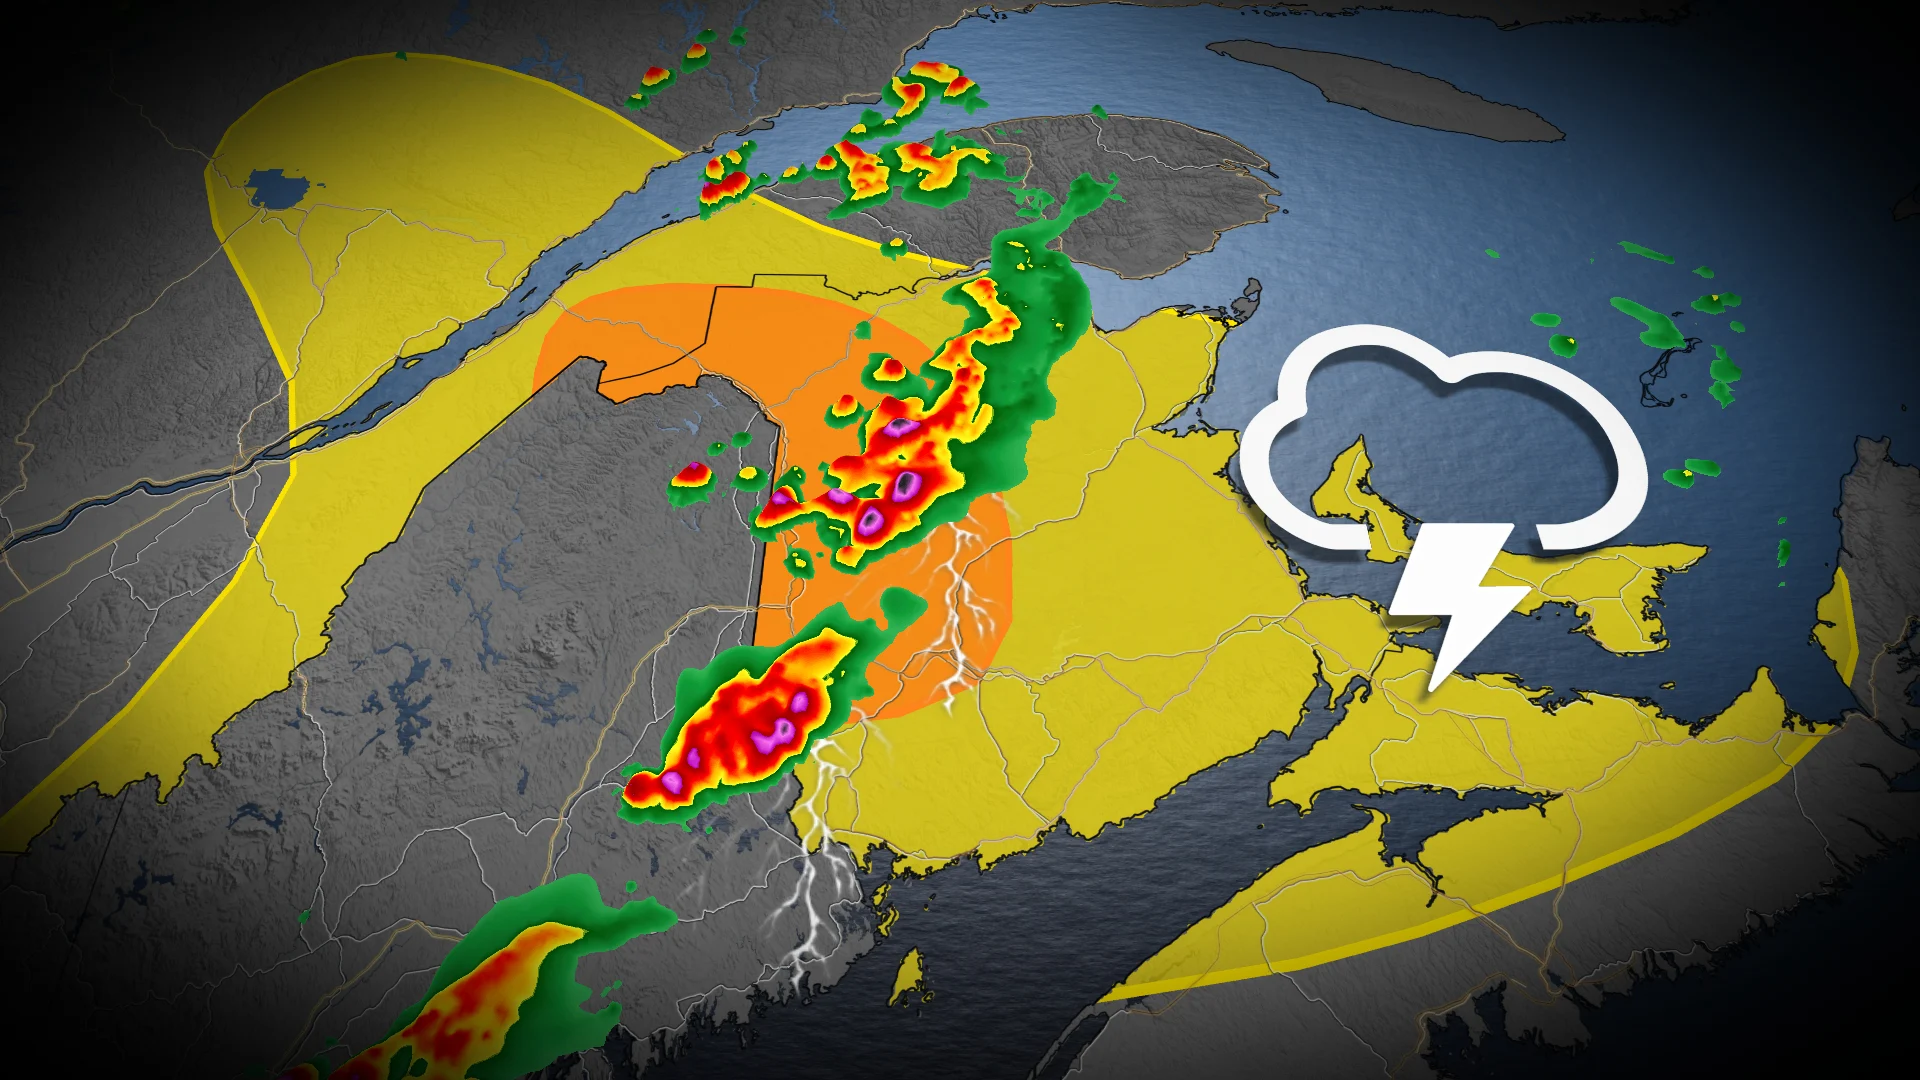 Plan ahead: Severe thunderstorms, with strong winds and hail, are possible in Atlantic Canada on Thursday. See HERE for timing